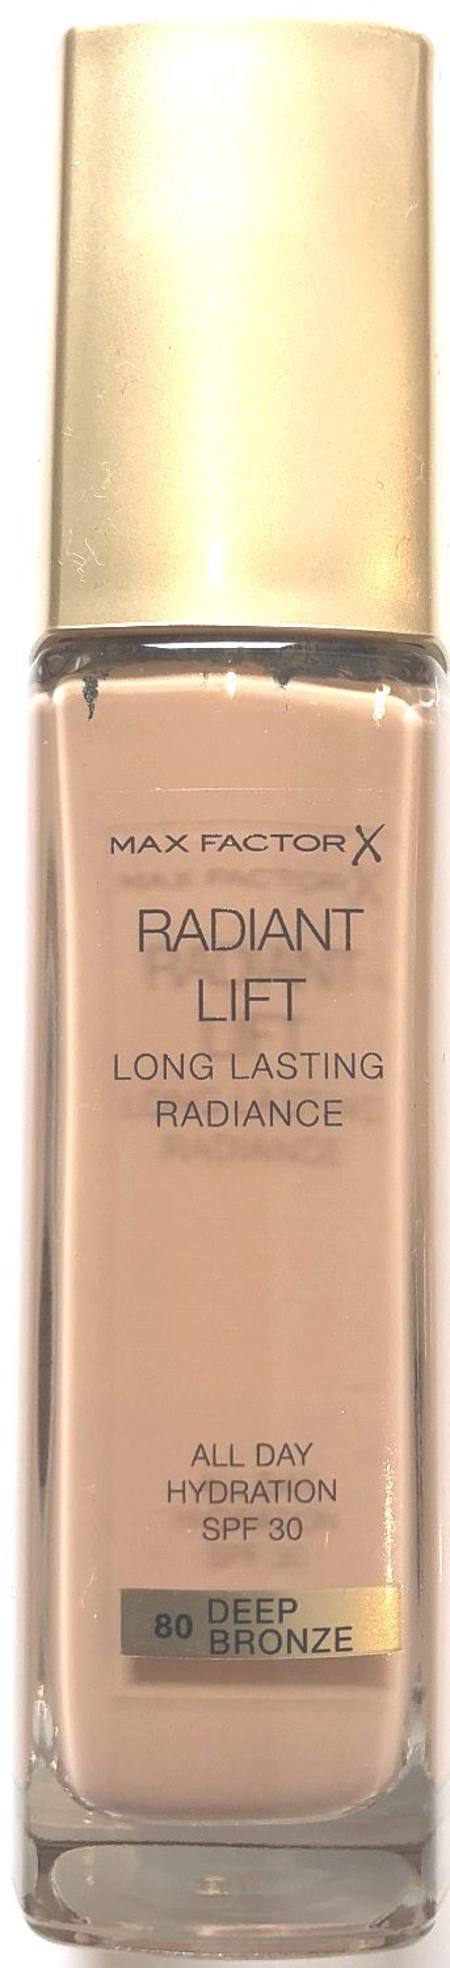 MAX FACTOR 30mL FOUNDATION RADIANT LIFT 80 DEEP BRONZE (NON CARDED)